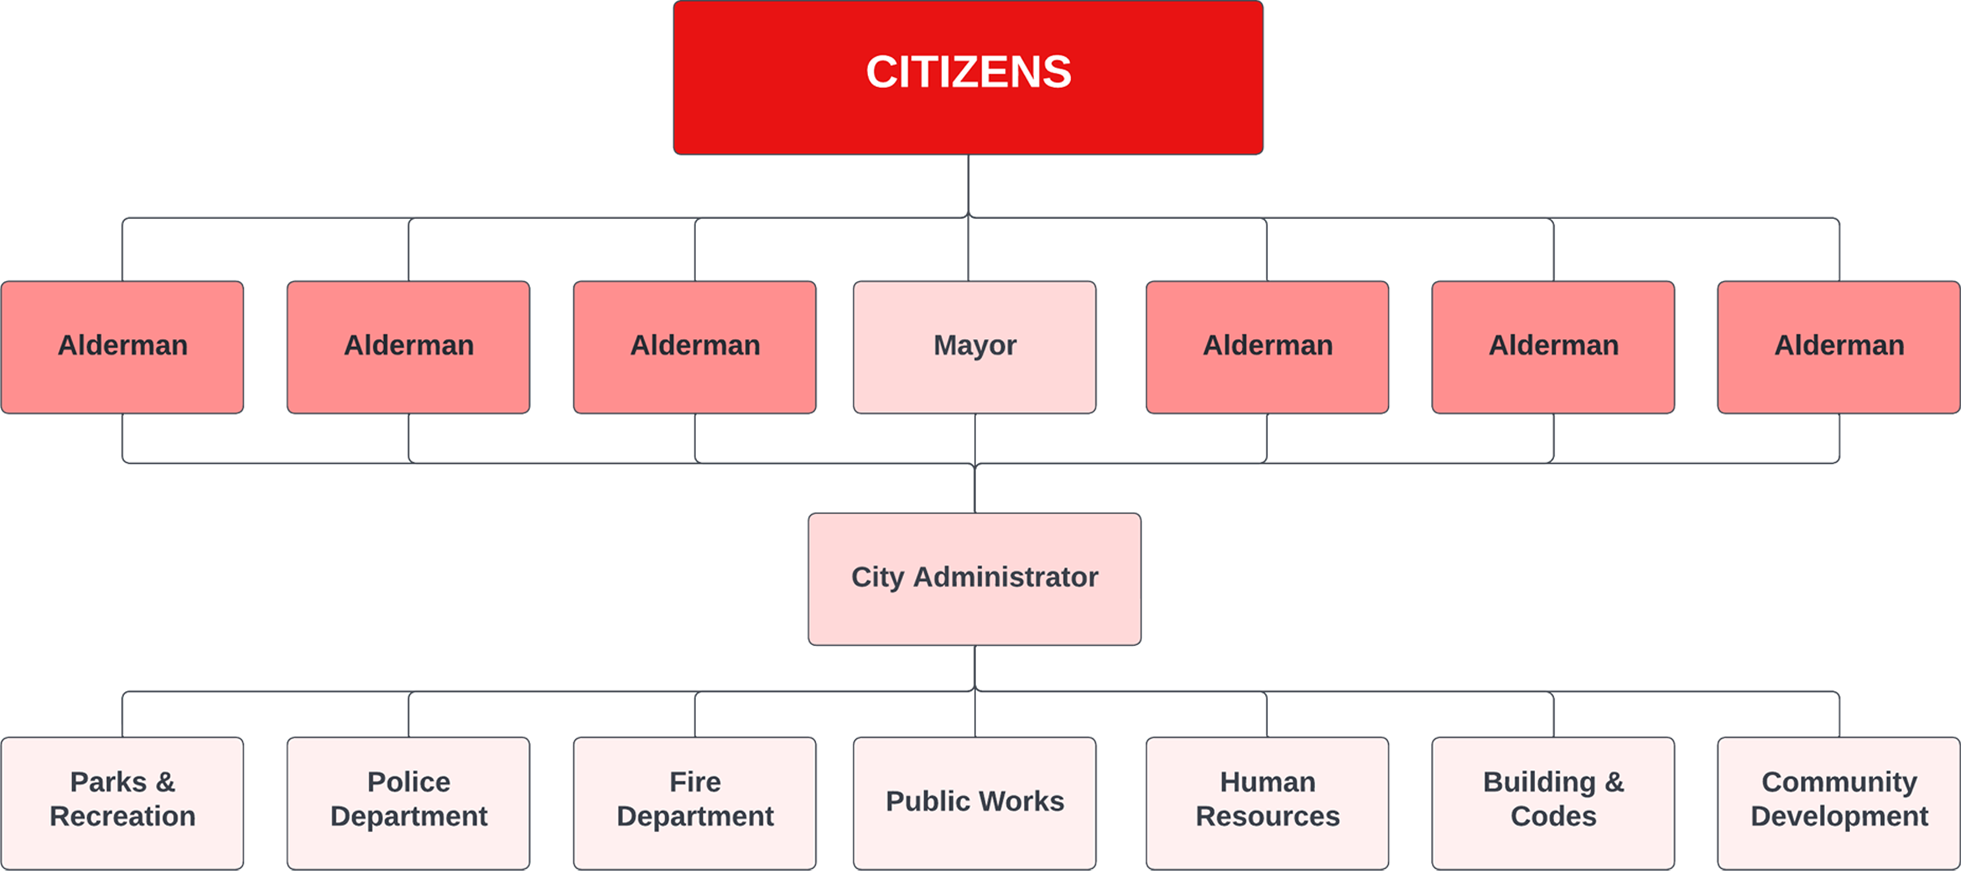 Council Administrator form of government, and what role the alderman plan